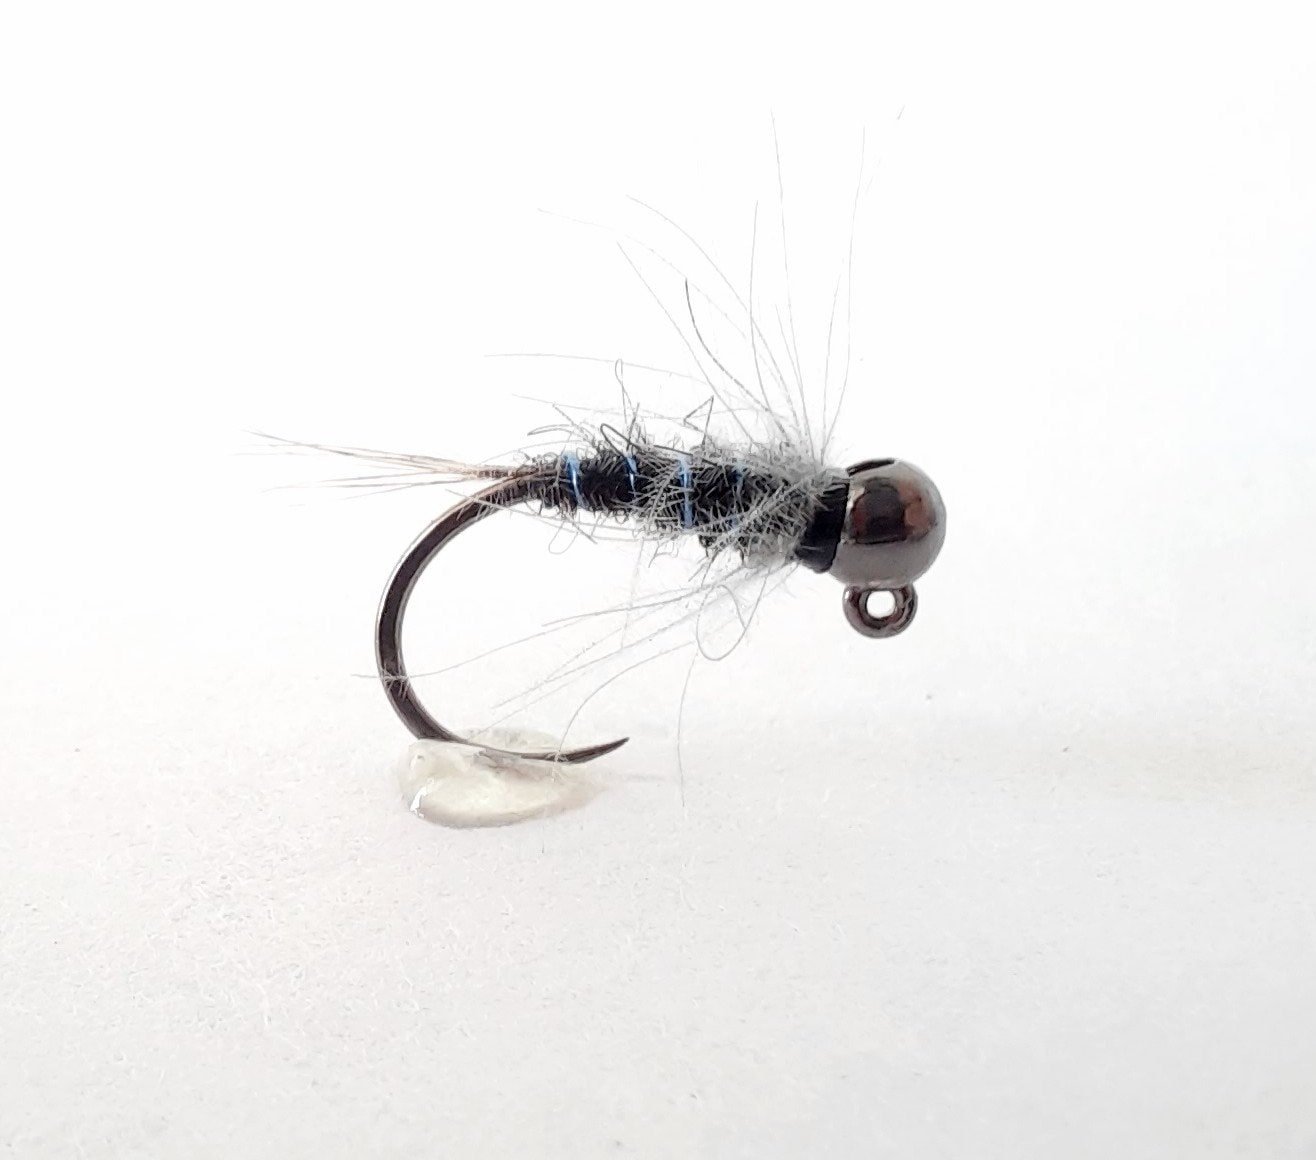 6 Eggstasy Egg Jig Trout and Steelhead Egg Fly Patterns. Winter Fly Fishing  Flies. Euro Nymph Egg. Tungsten Barbless Jig. 